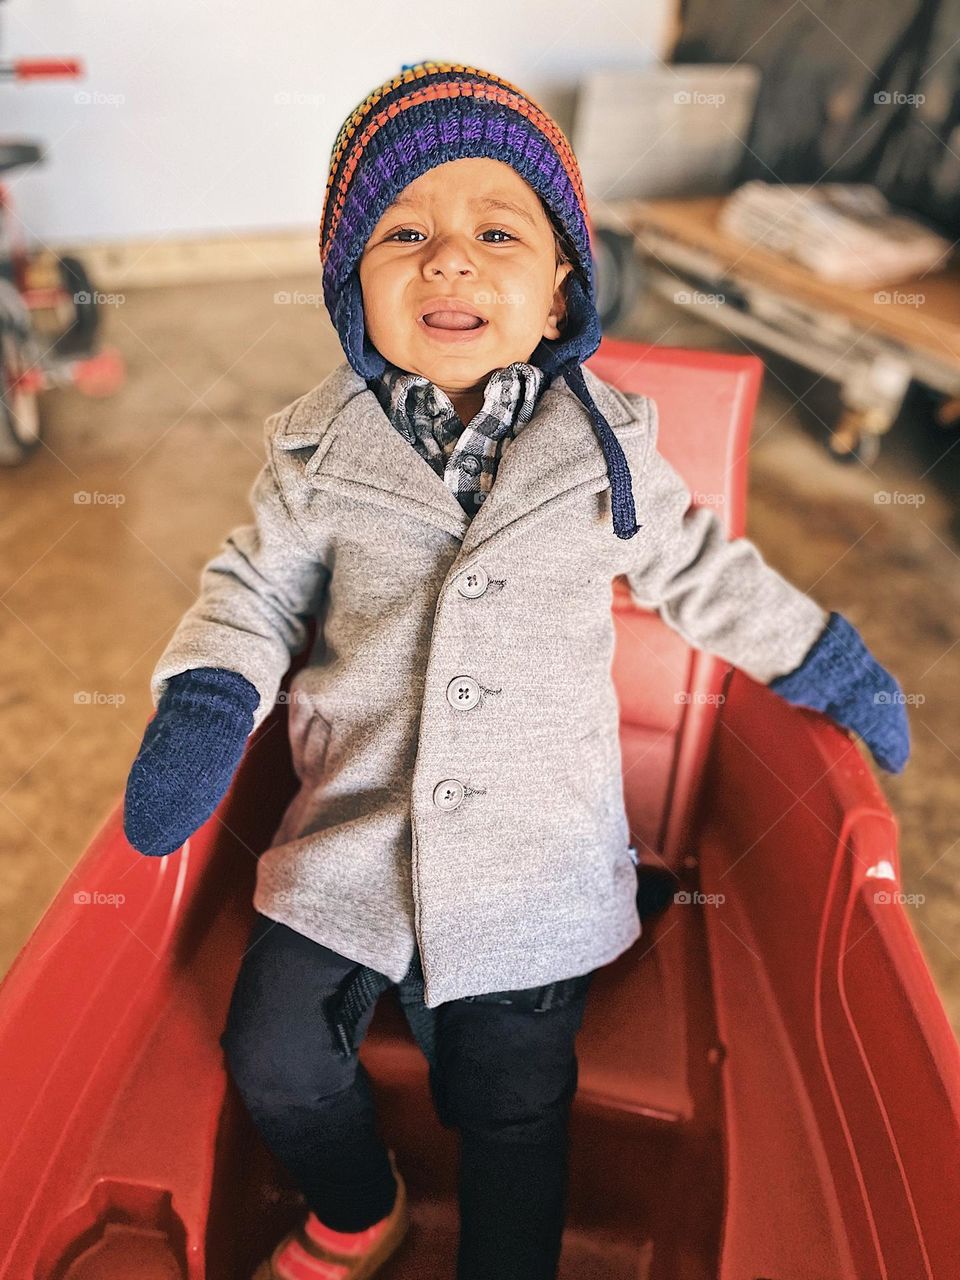 Upset toddler in Radio Flyer wagon, toddler is sad, toddler showing emotion of sadness, toddler is unhappy in red wagon, toddler cries out with sadness, facial expressions on a toddler, making sad faces in a Radio Flyer wagon, crying out with sadness